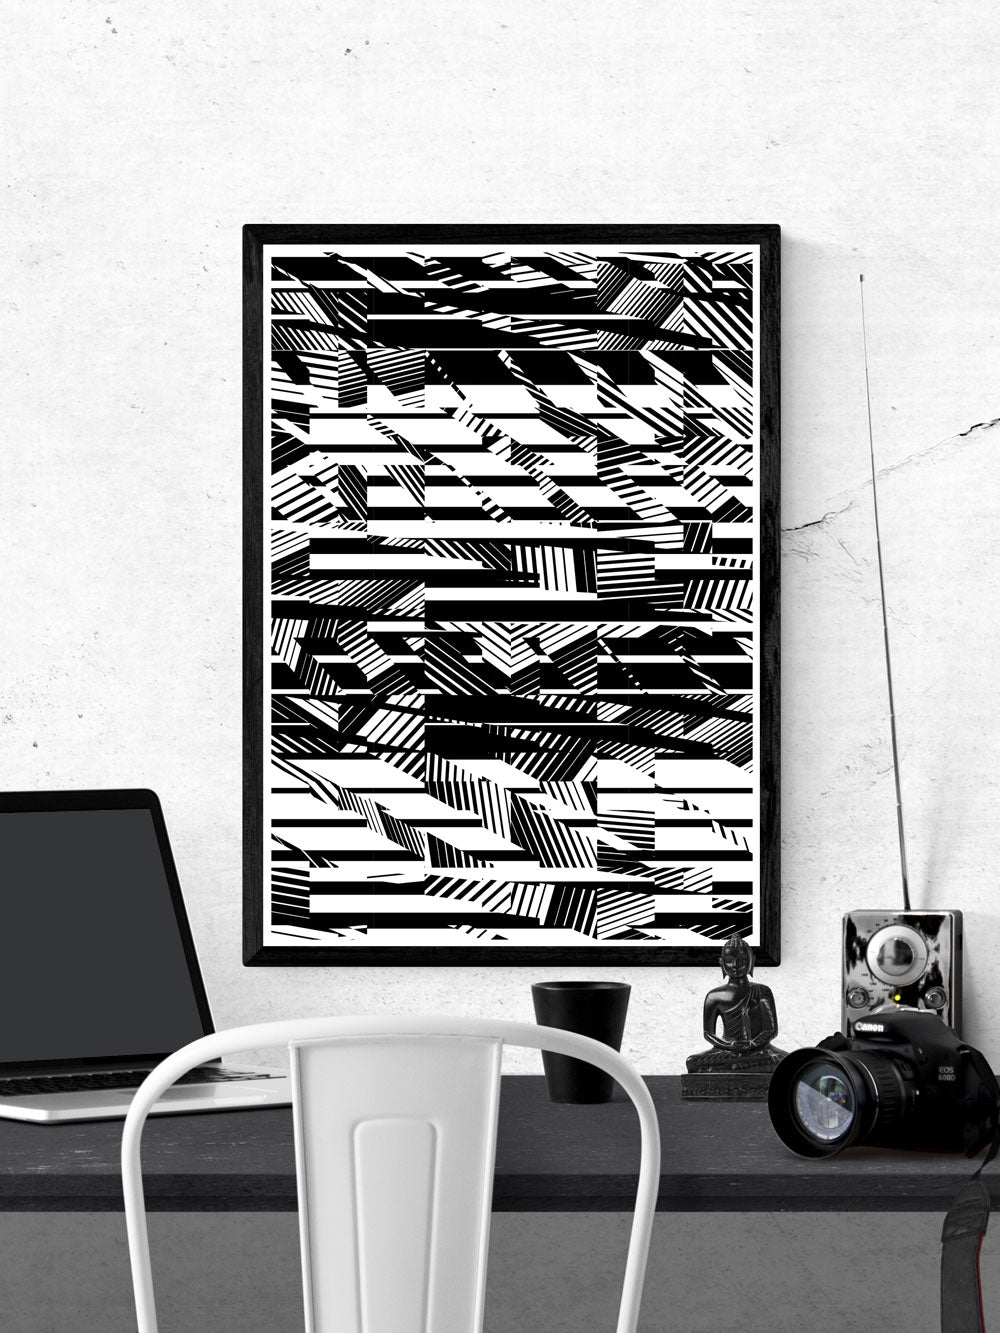 Fax Black and White Pattern Print on a wall